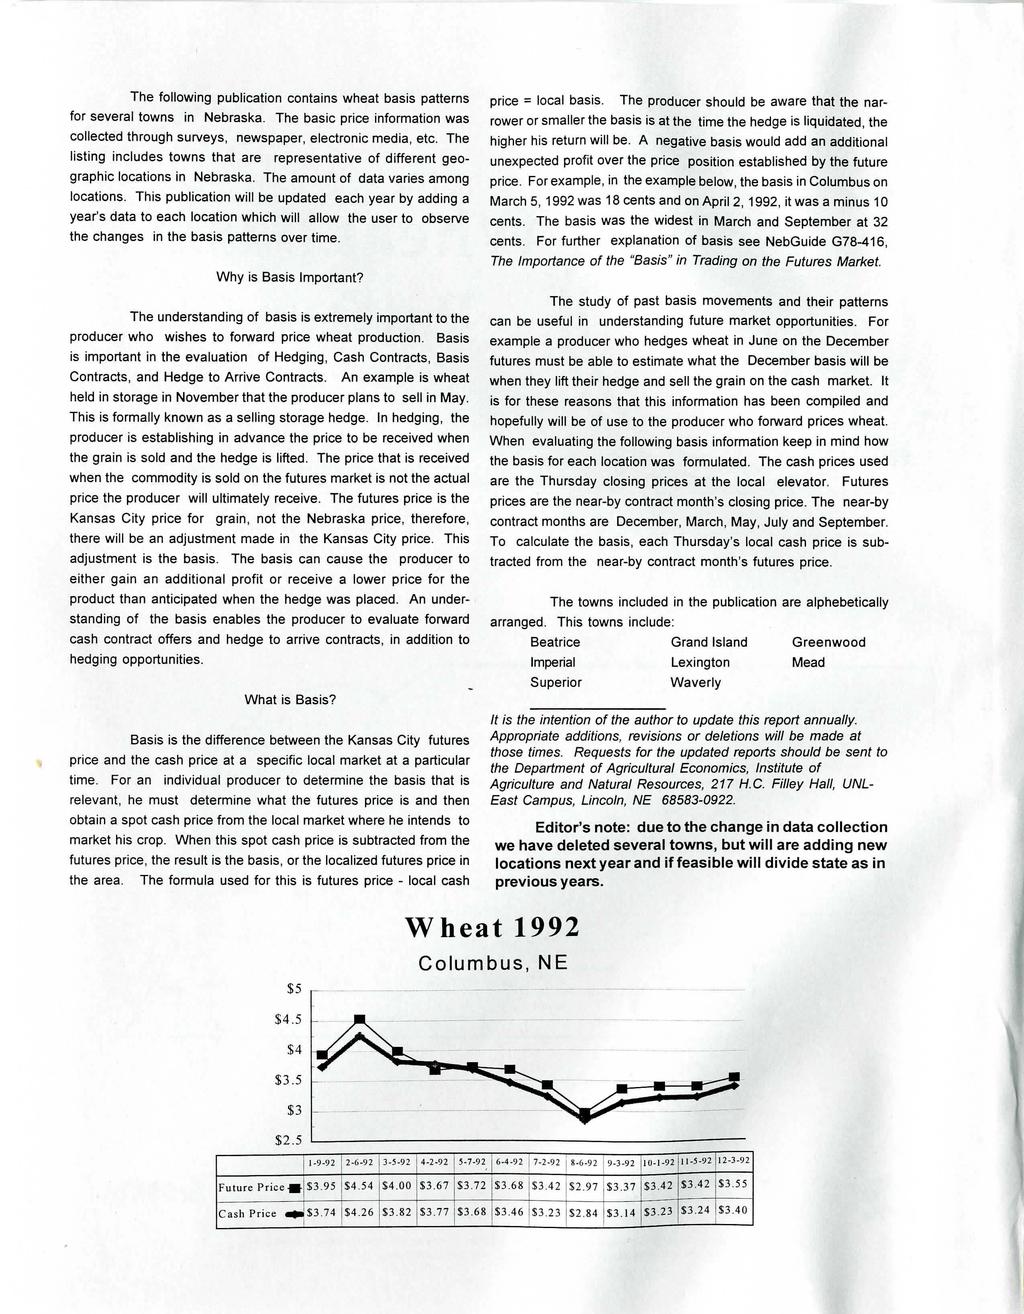 The following publication contains wheat basis patterns for several towns in Nebraska. The basic price information was collected through surveys, newspaper, electronic media, etc.